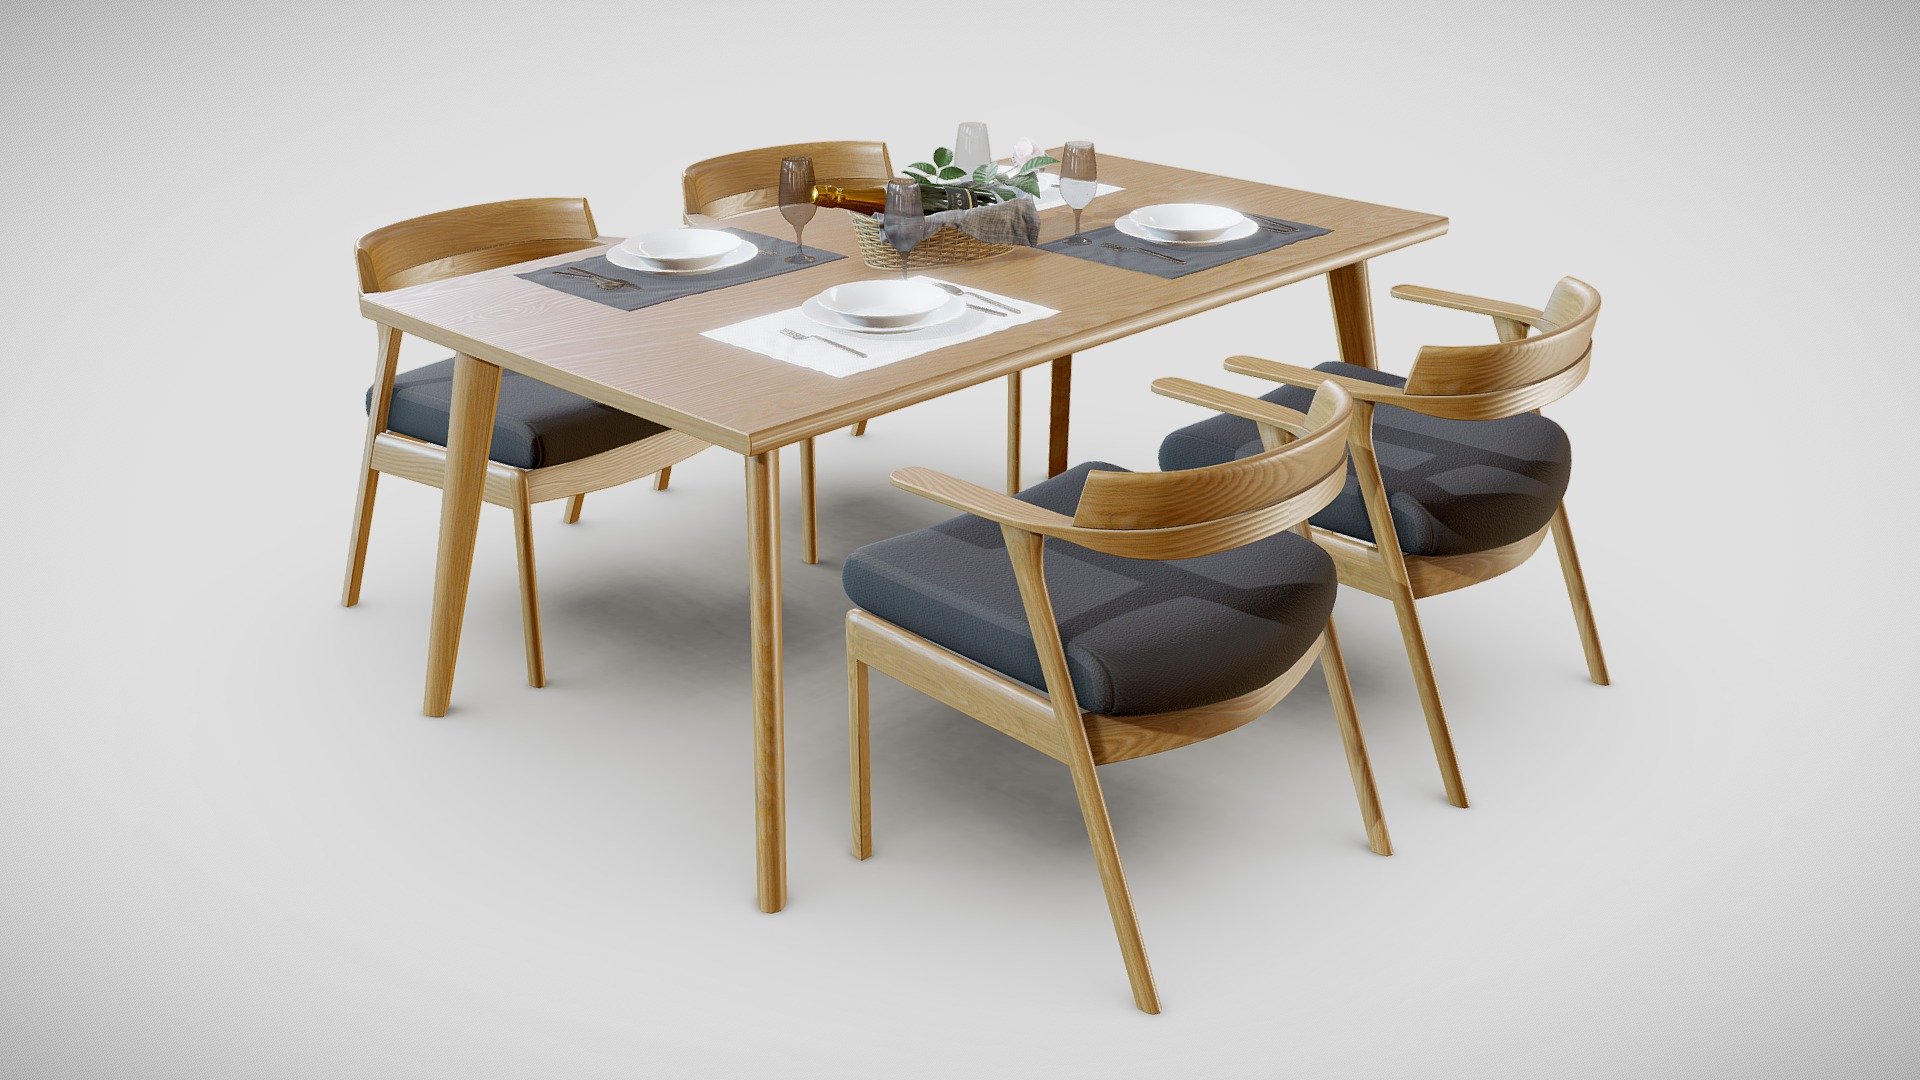 Dining Table And Chair Set Buy Royalty Free 3D Model By 3DECraft JakubTrusiewicz A93b6e7 Sketchfab Store